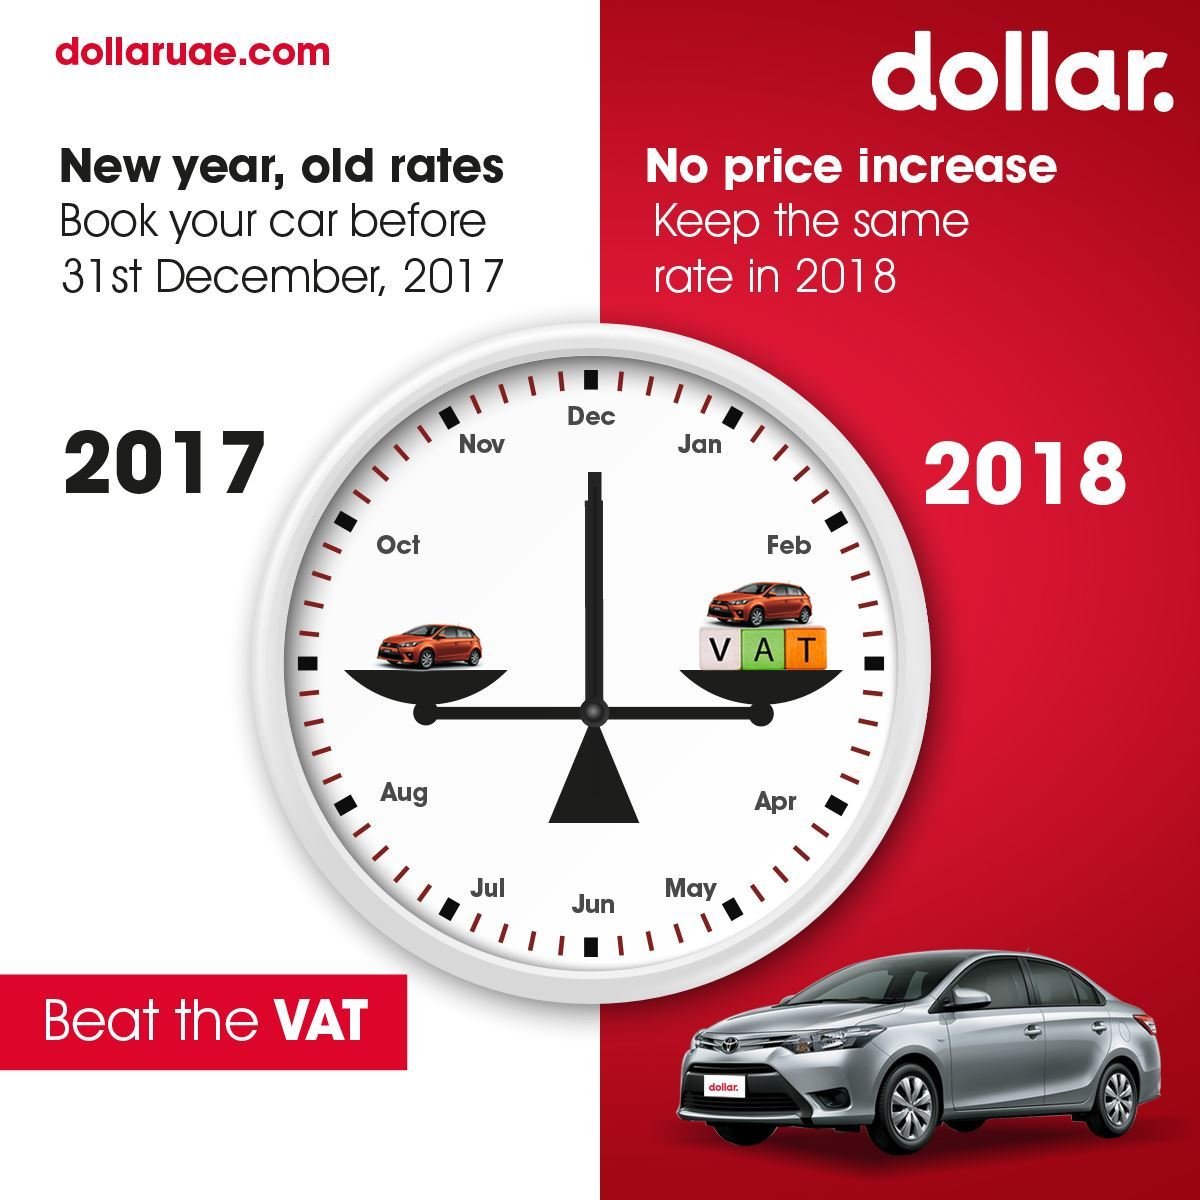 Ring in the new year with exciting car rental savings from Dollar